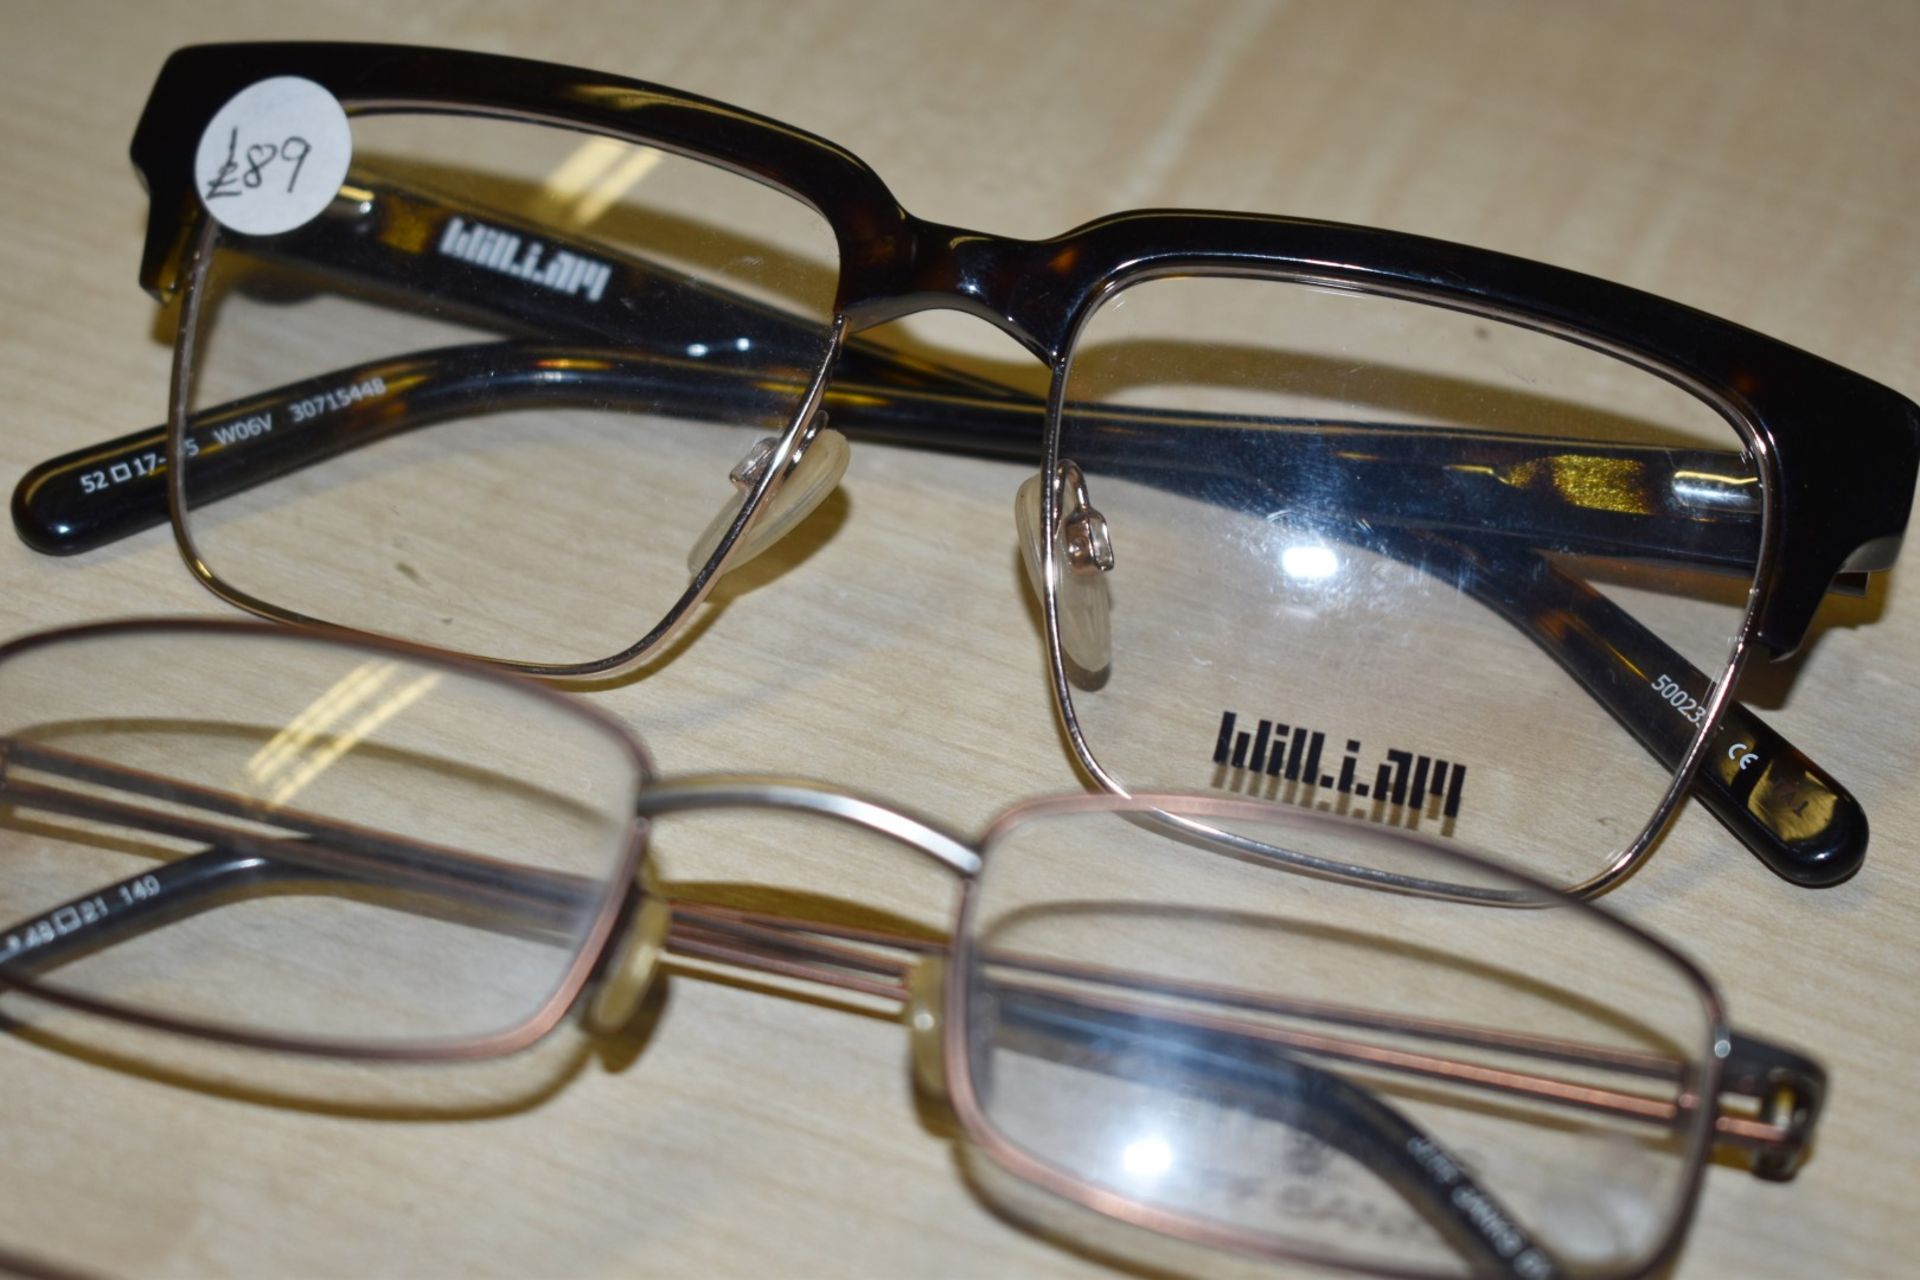 6 x Assorted Pairs of Designer Spectacle Eye Glasses - Ex Display Stock - Brands Include Jeff Banks, - Image 7 of 10